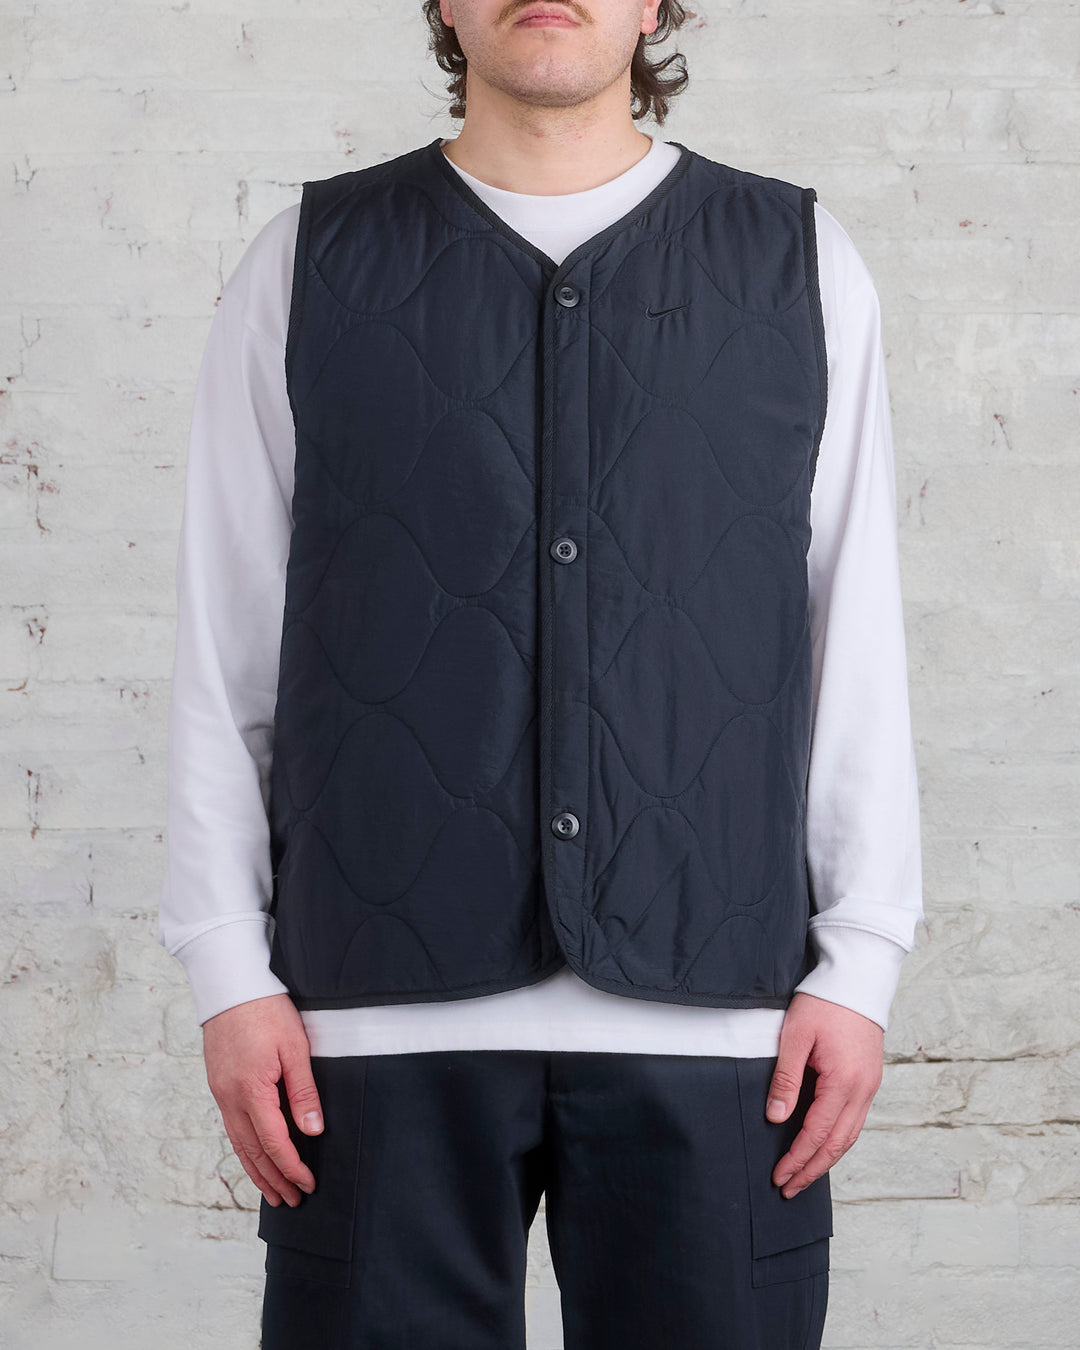 Nike Life Woven Insulated Military Vest Black Black